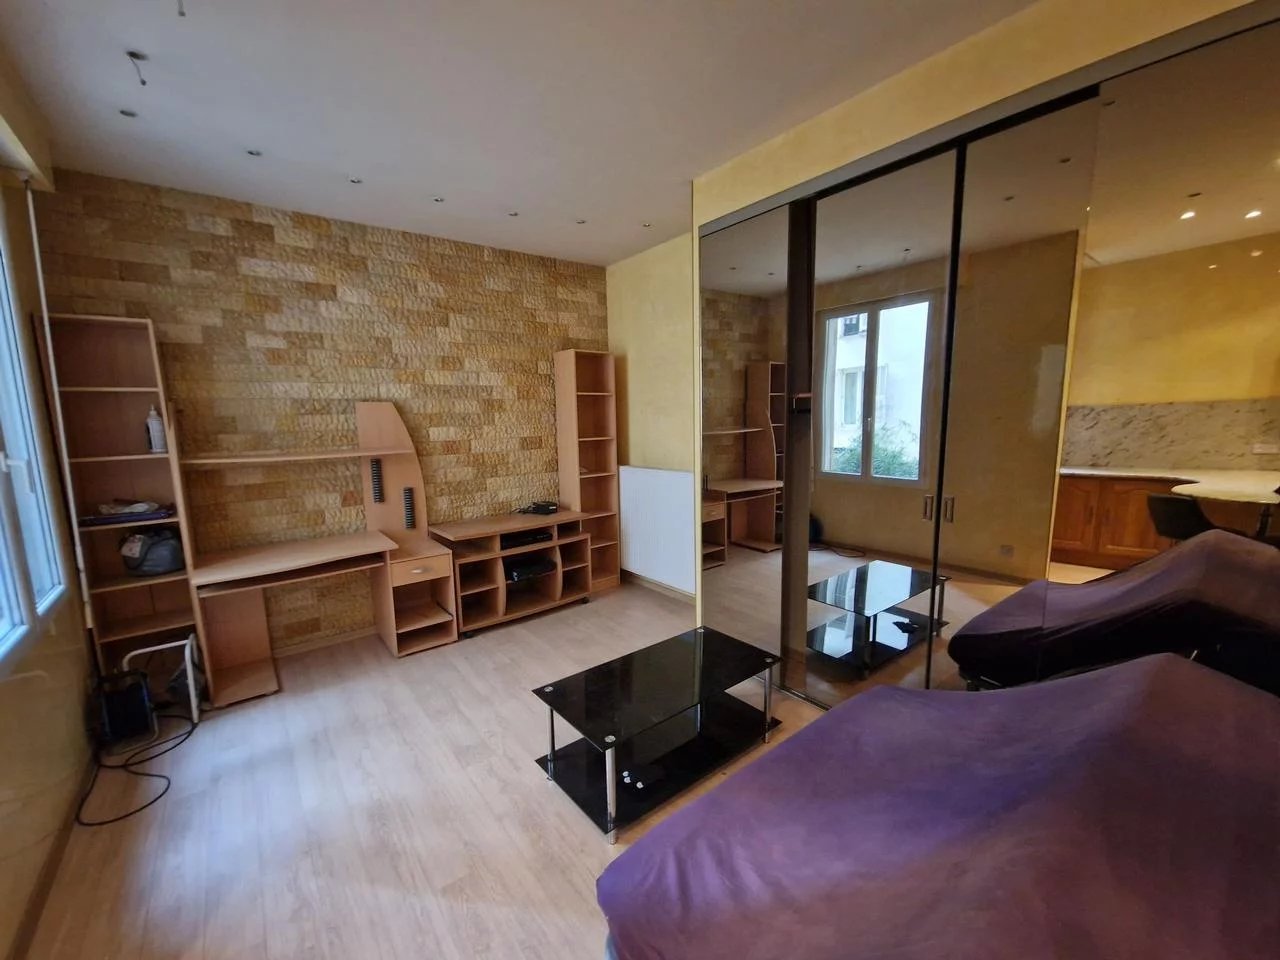 Appartement  1 Rooms 28.91m2  for sale   159 000 €